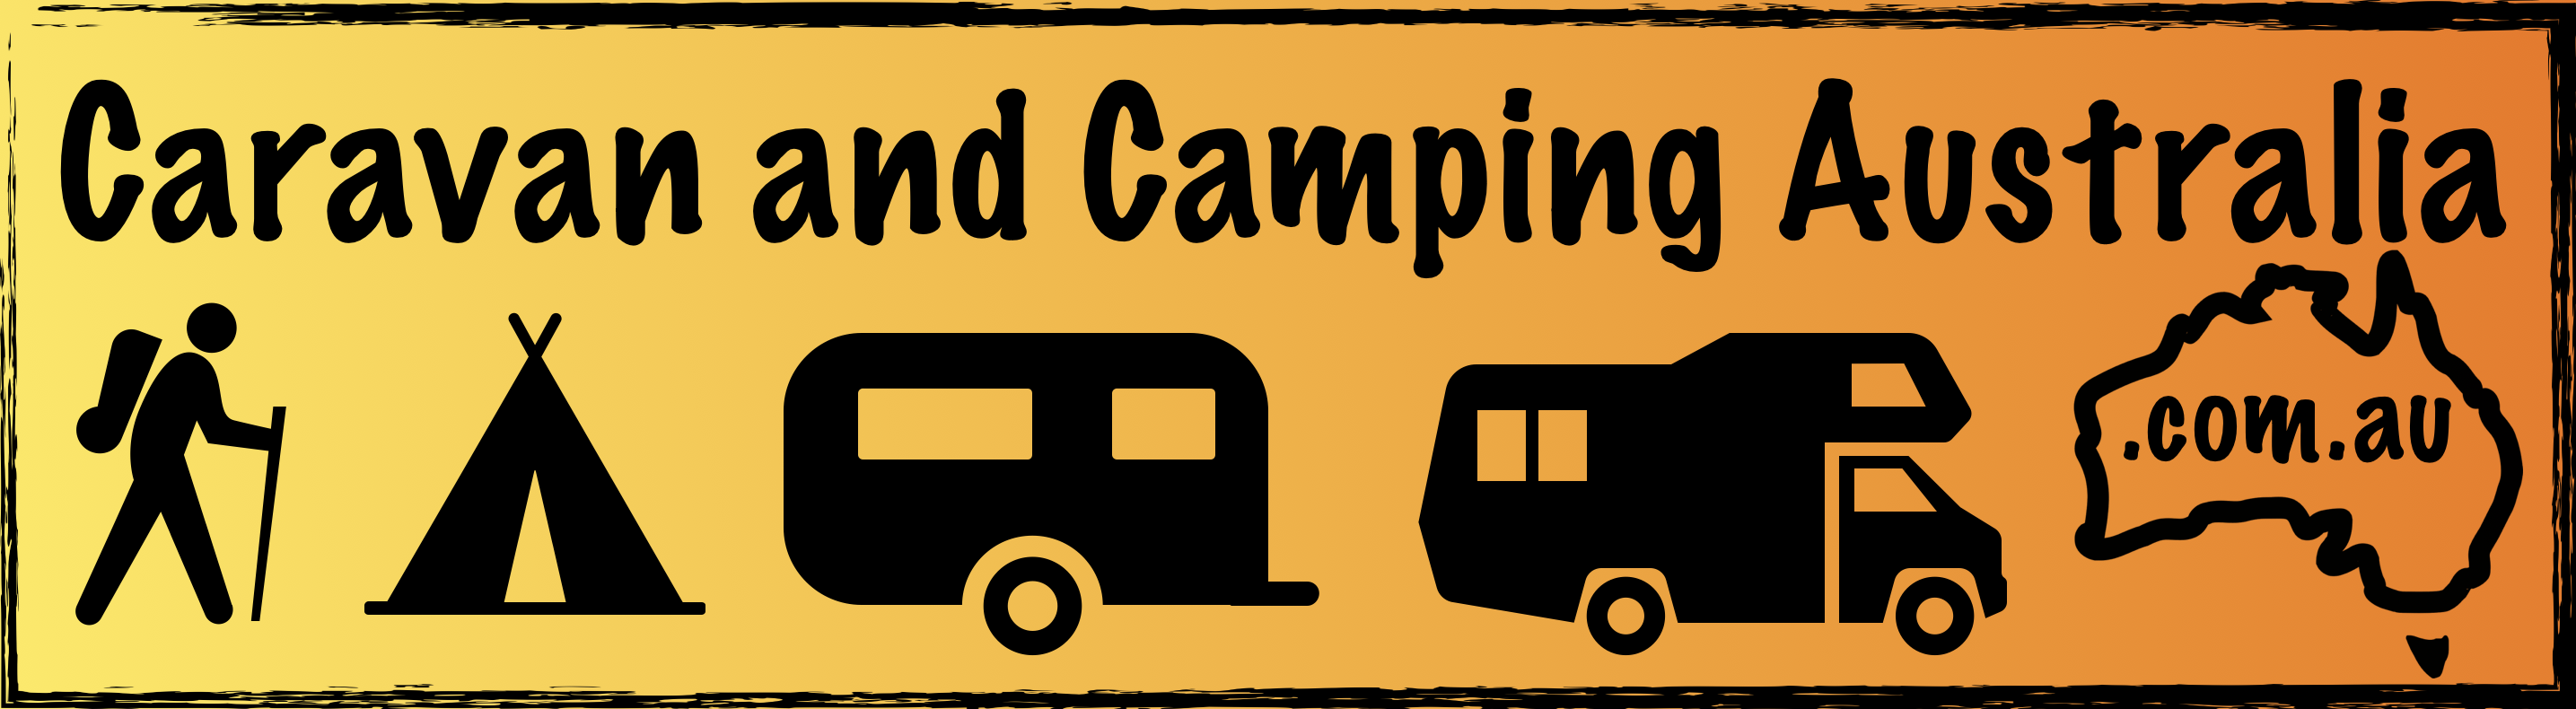 The official home for all things Caravan and Camping